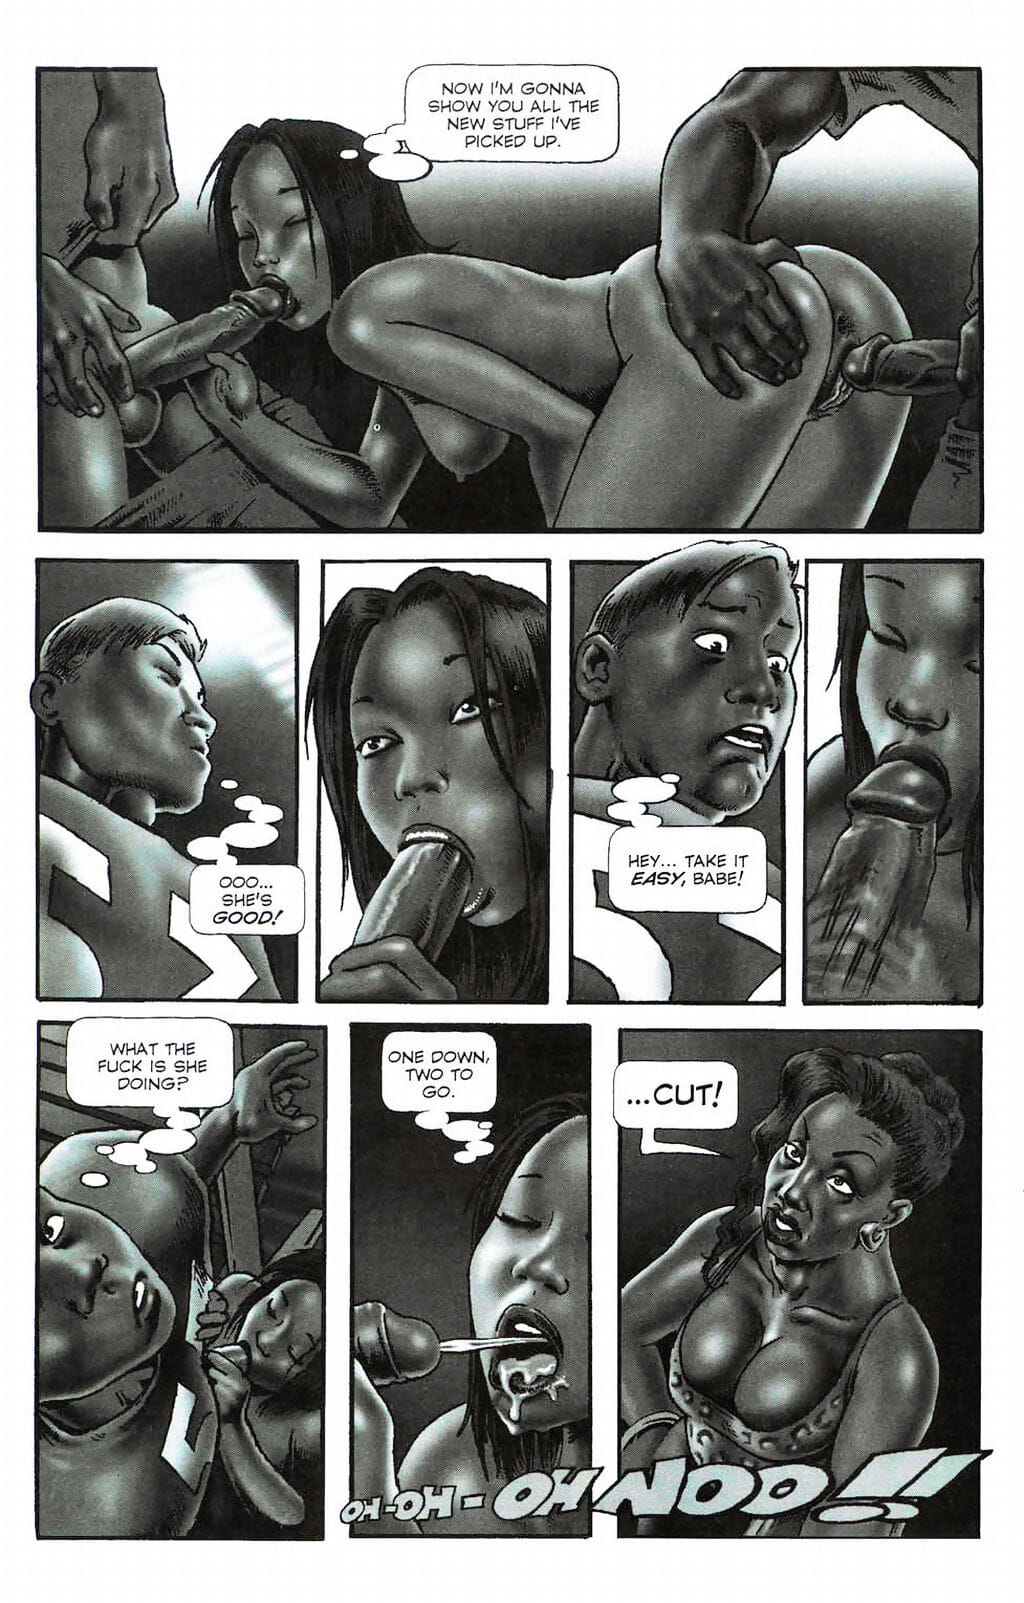 Alraune #5 page 1